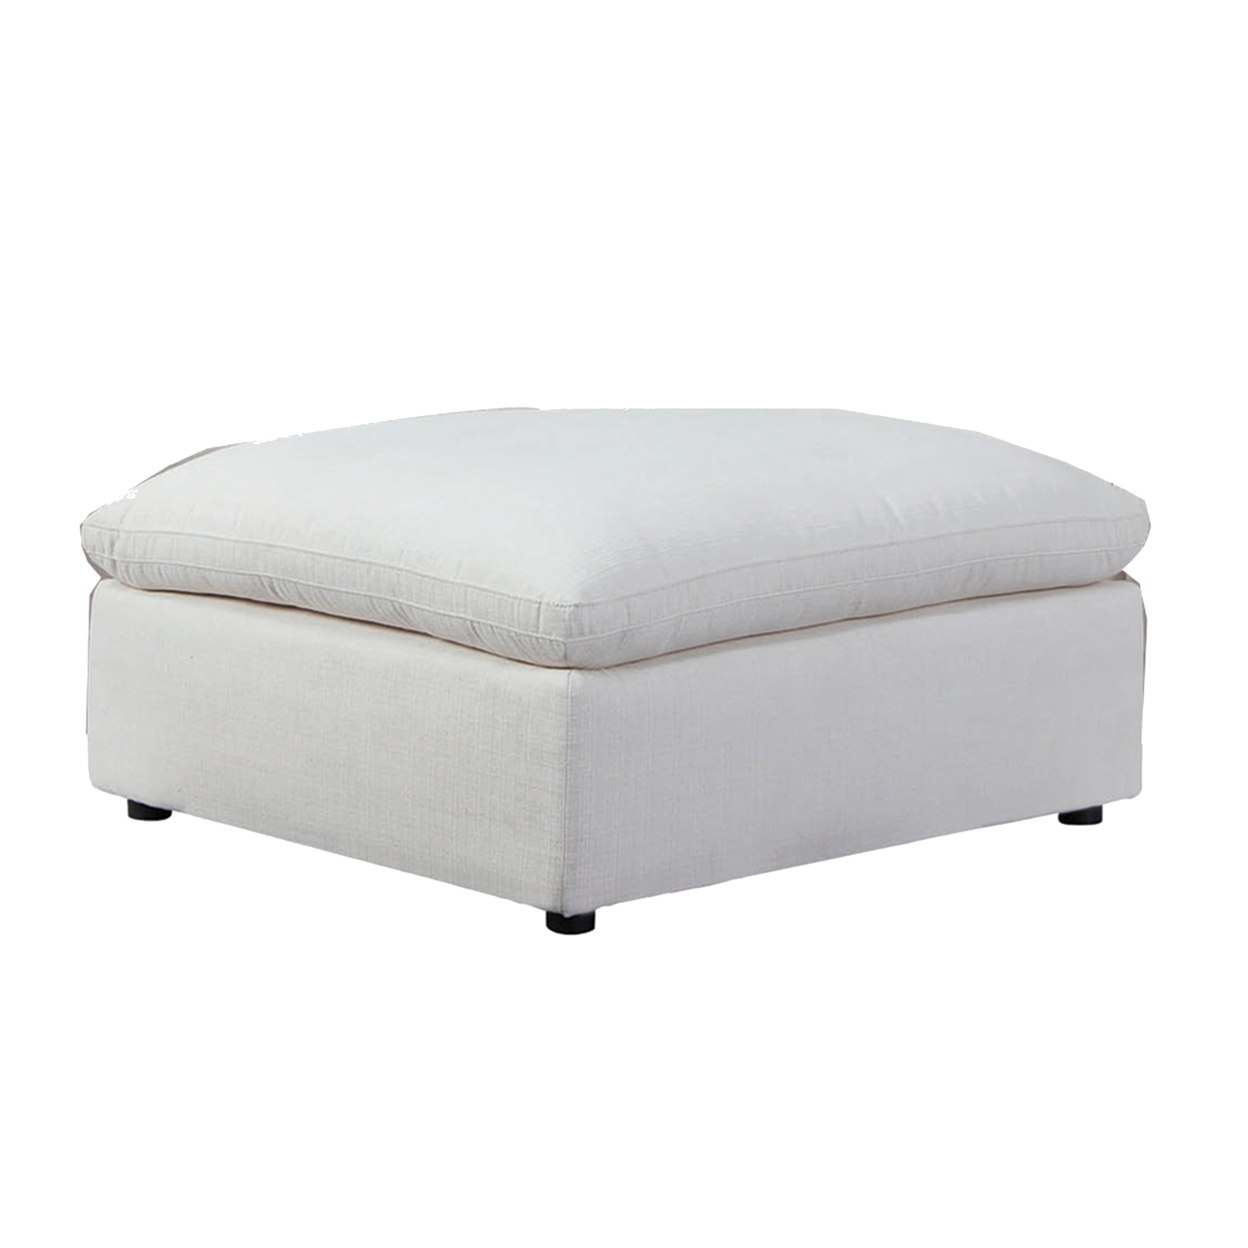 Fabric Upholstered Square Shape Ottoman With Round Legs, Off White- Saltoro Sherpi